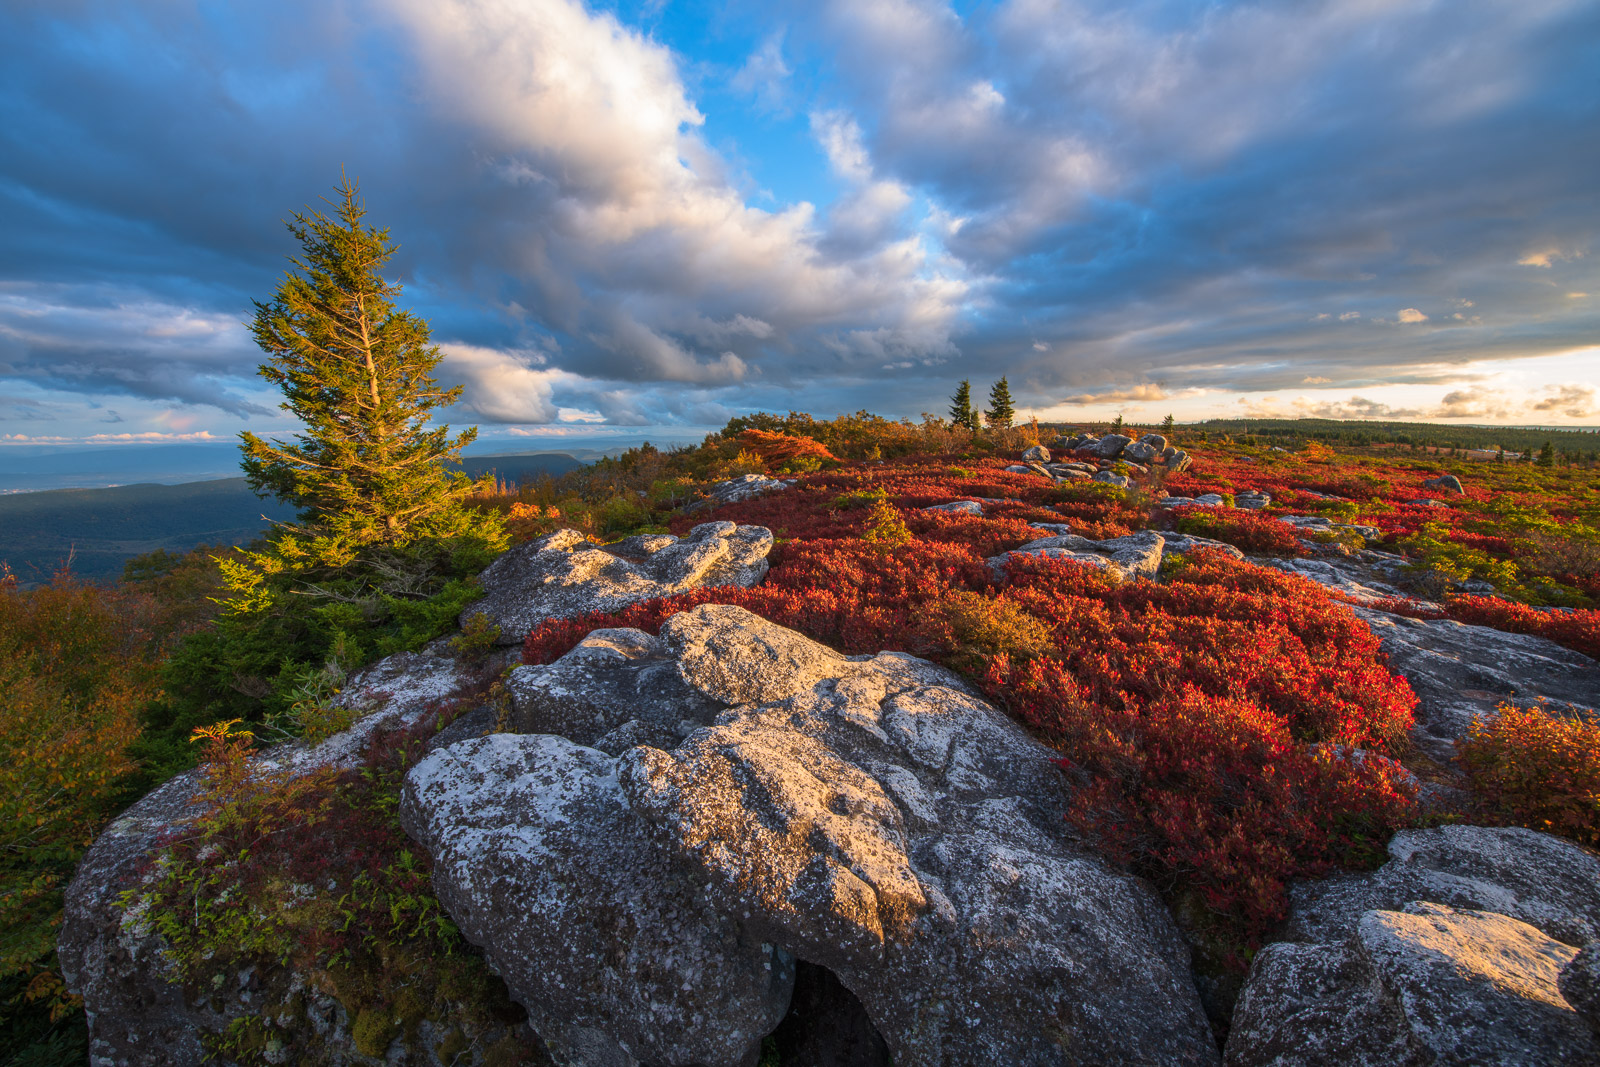 Time stands still high above Canaan Valley, in Dolly Sods, where a flat, windswept expanse of subalpine heath barrens opens up...